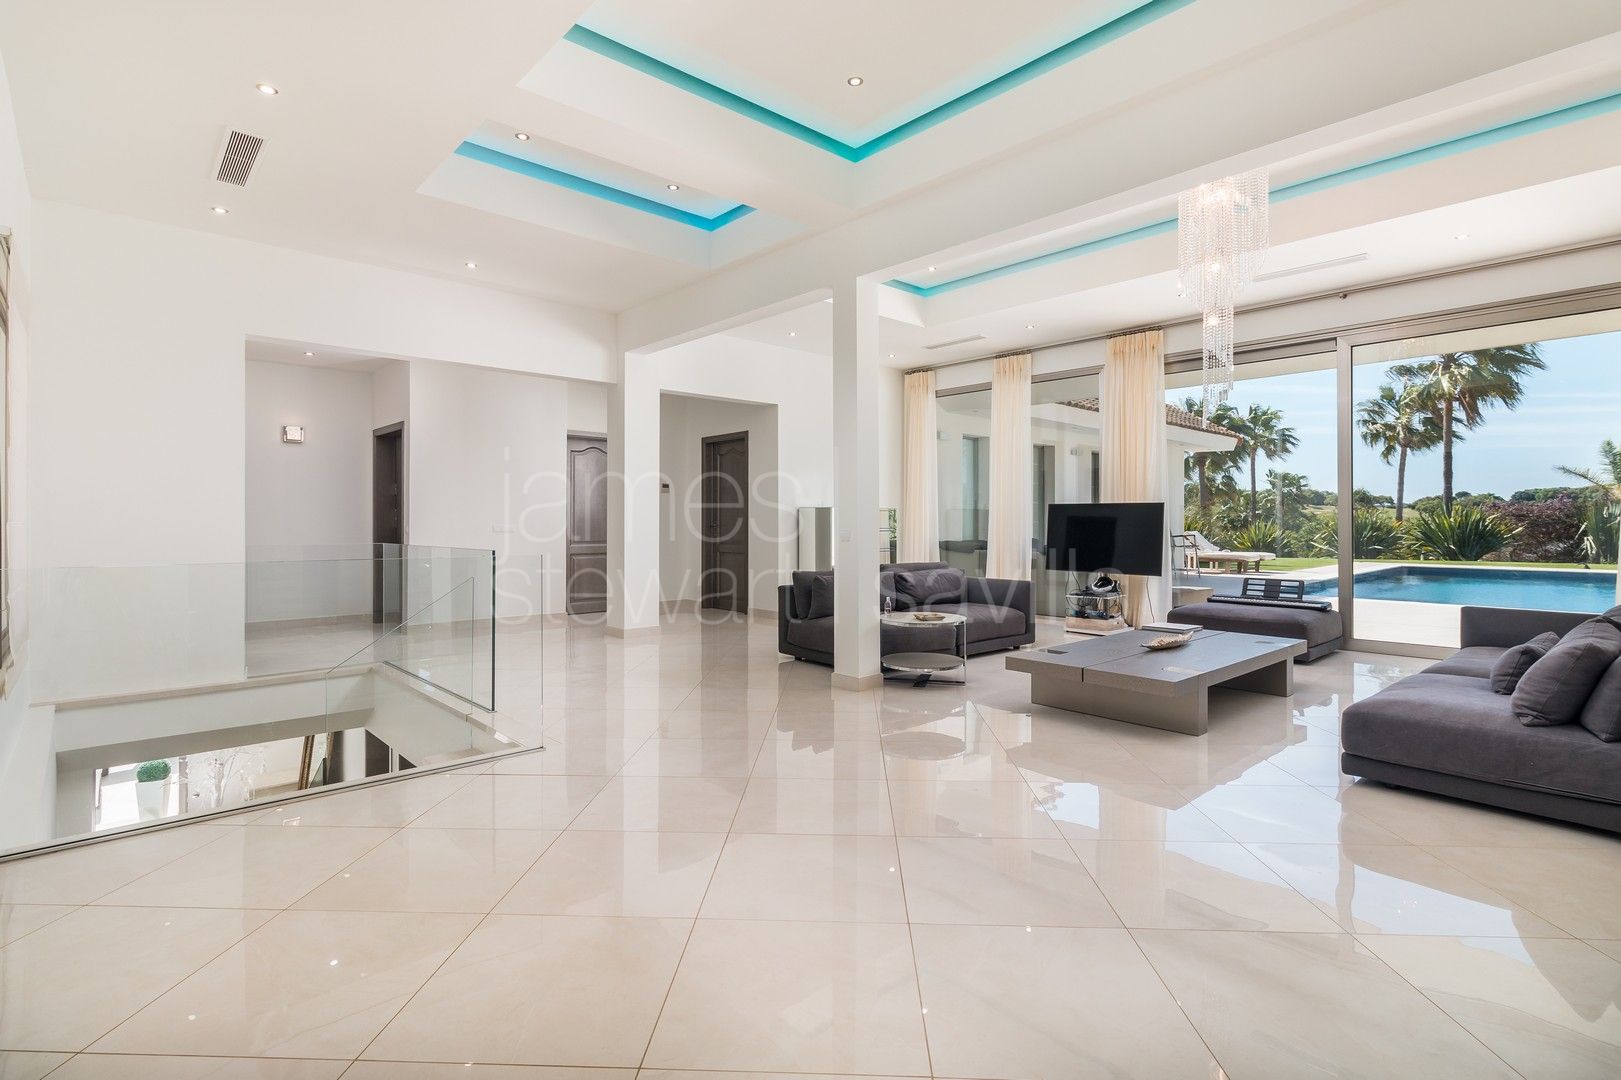 Exceptional home in the sotogrande Alto with 5 bedroom on an elevated plot